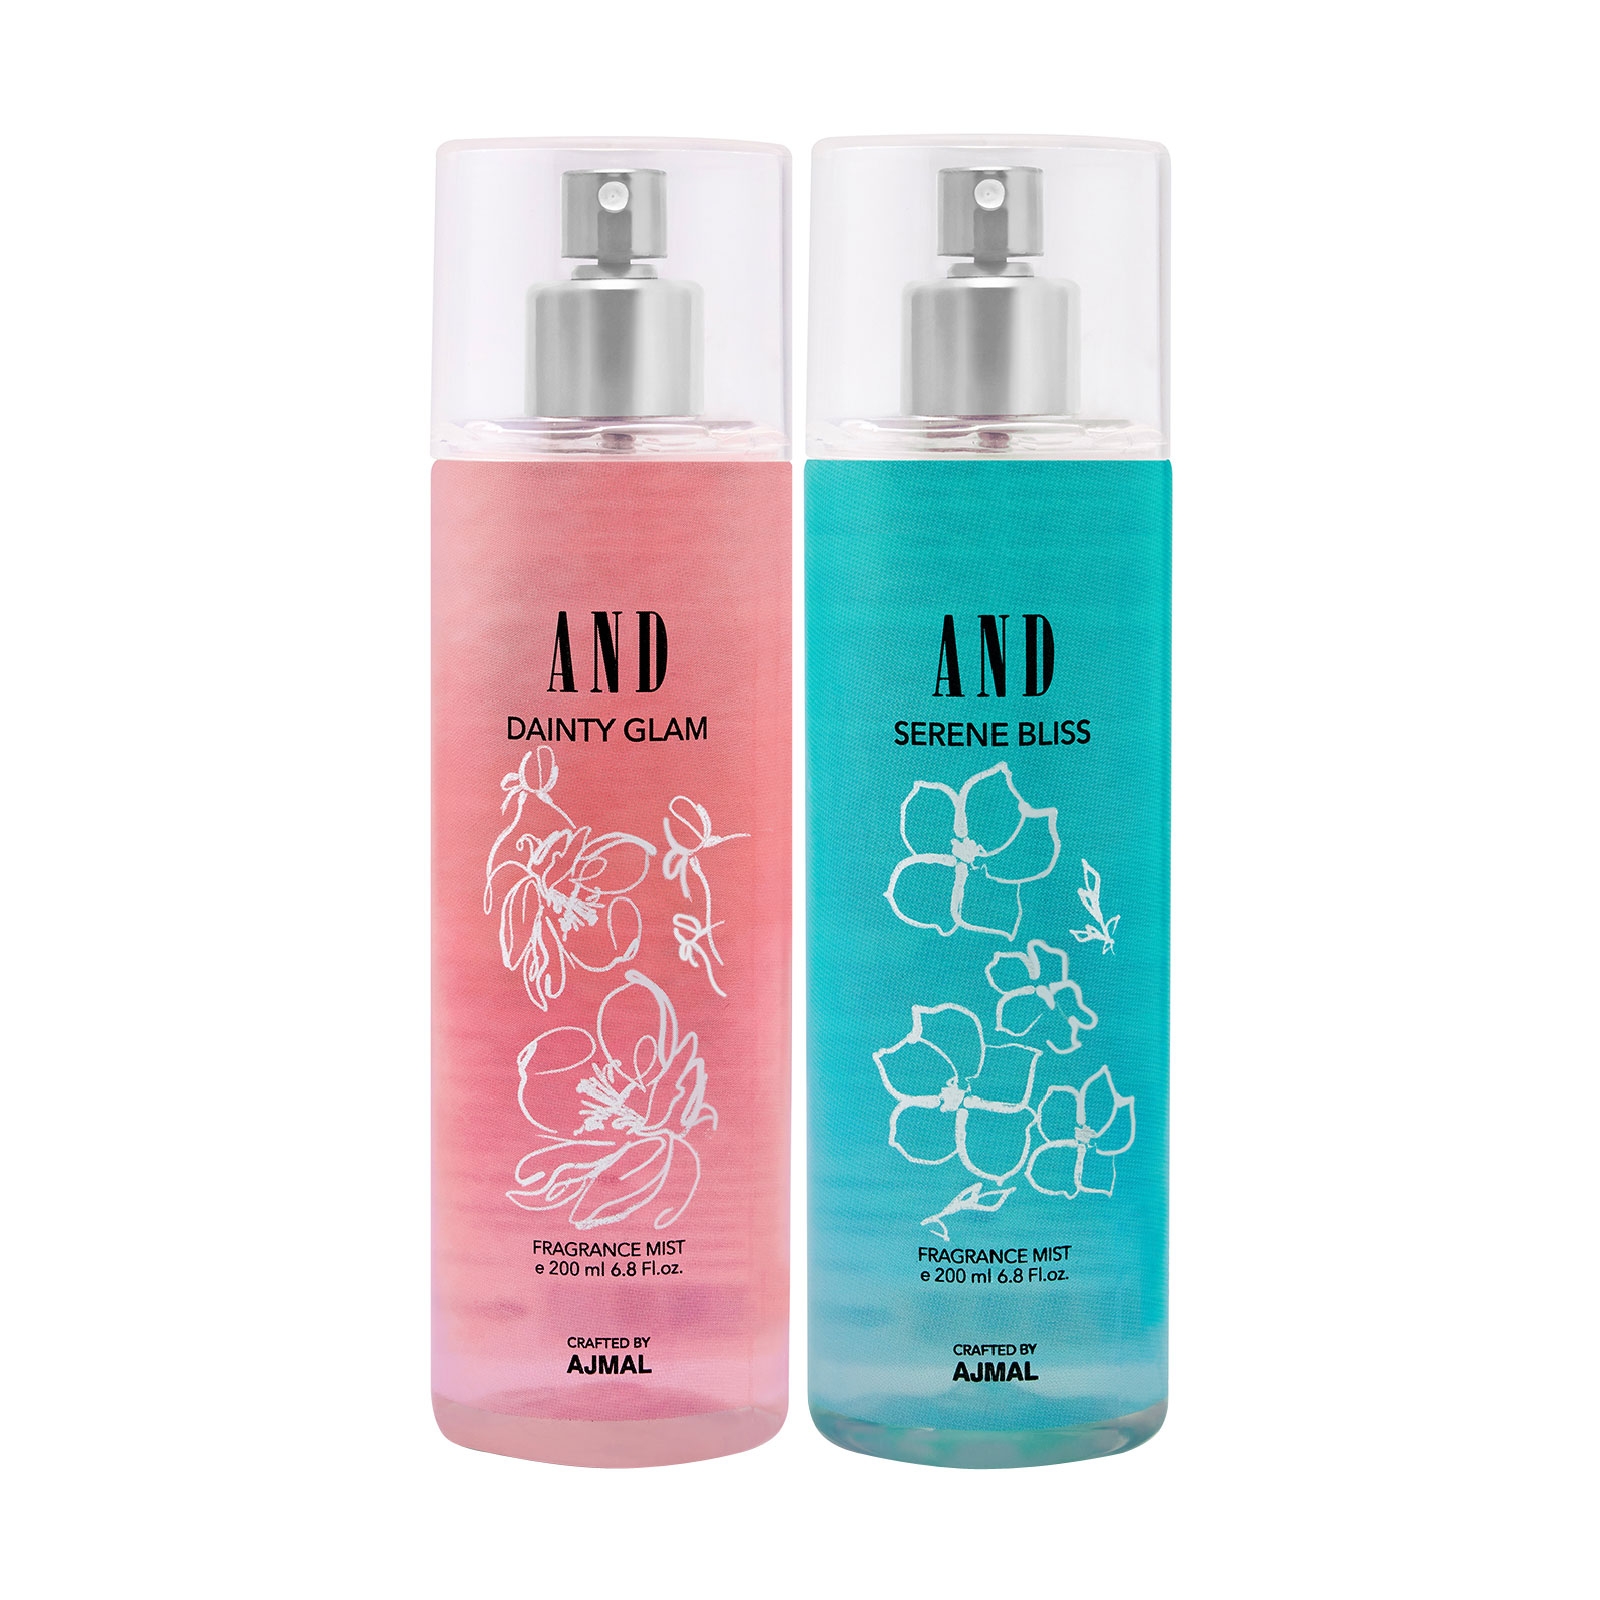 AND Crafted By Ajmal | AND Dainty Glam & Serene Bliss Pack of 2 Body Mist 200ML each Long Lasting Scent Spray Gift For Women Perfume Crafted by Ajmal + 2 Parfum Testers